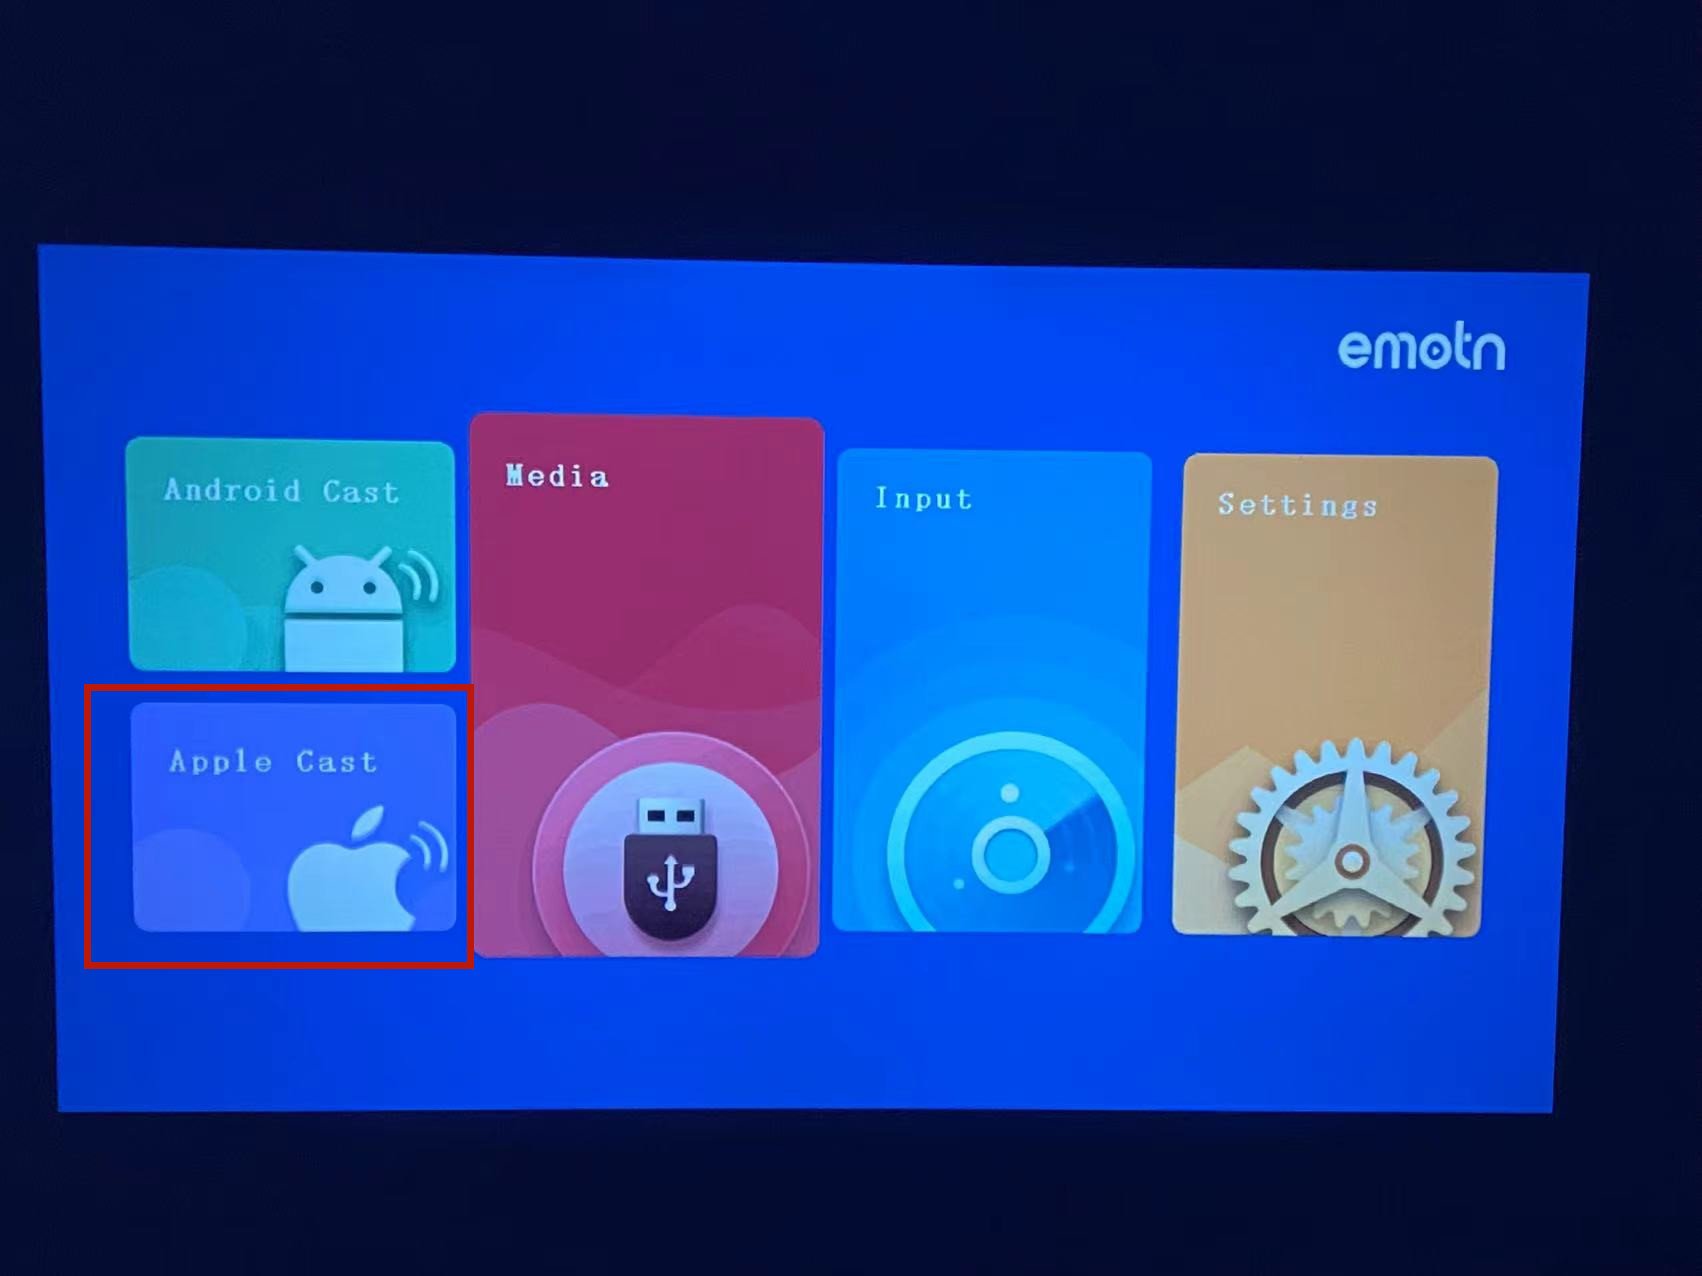 How to mirror my iPhone to Emotn C1 projector?